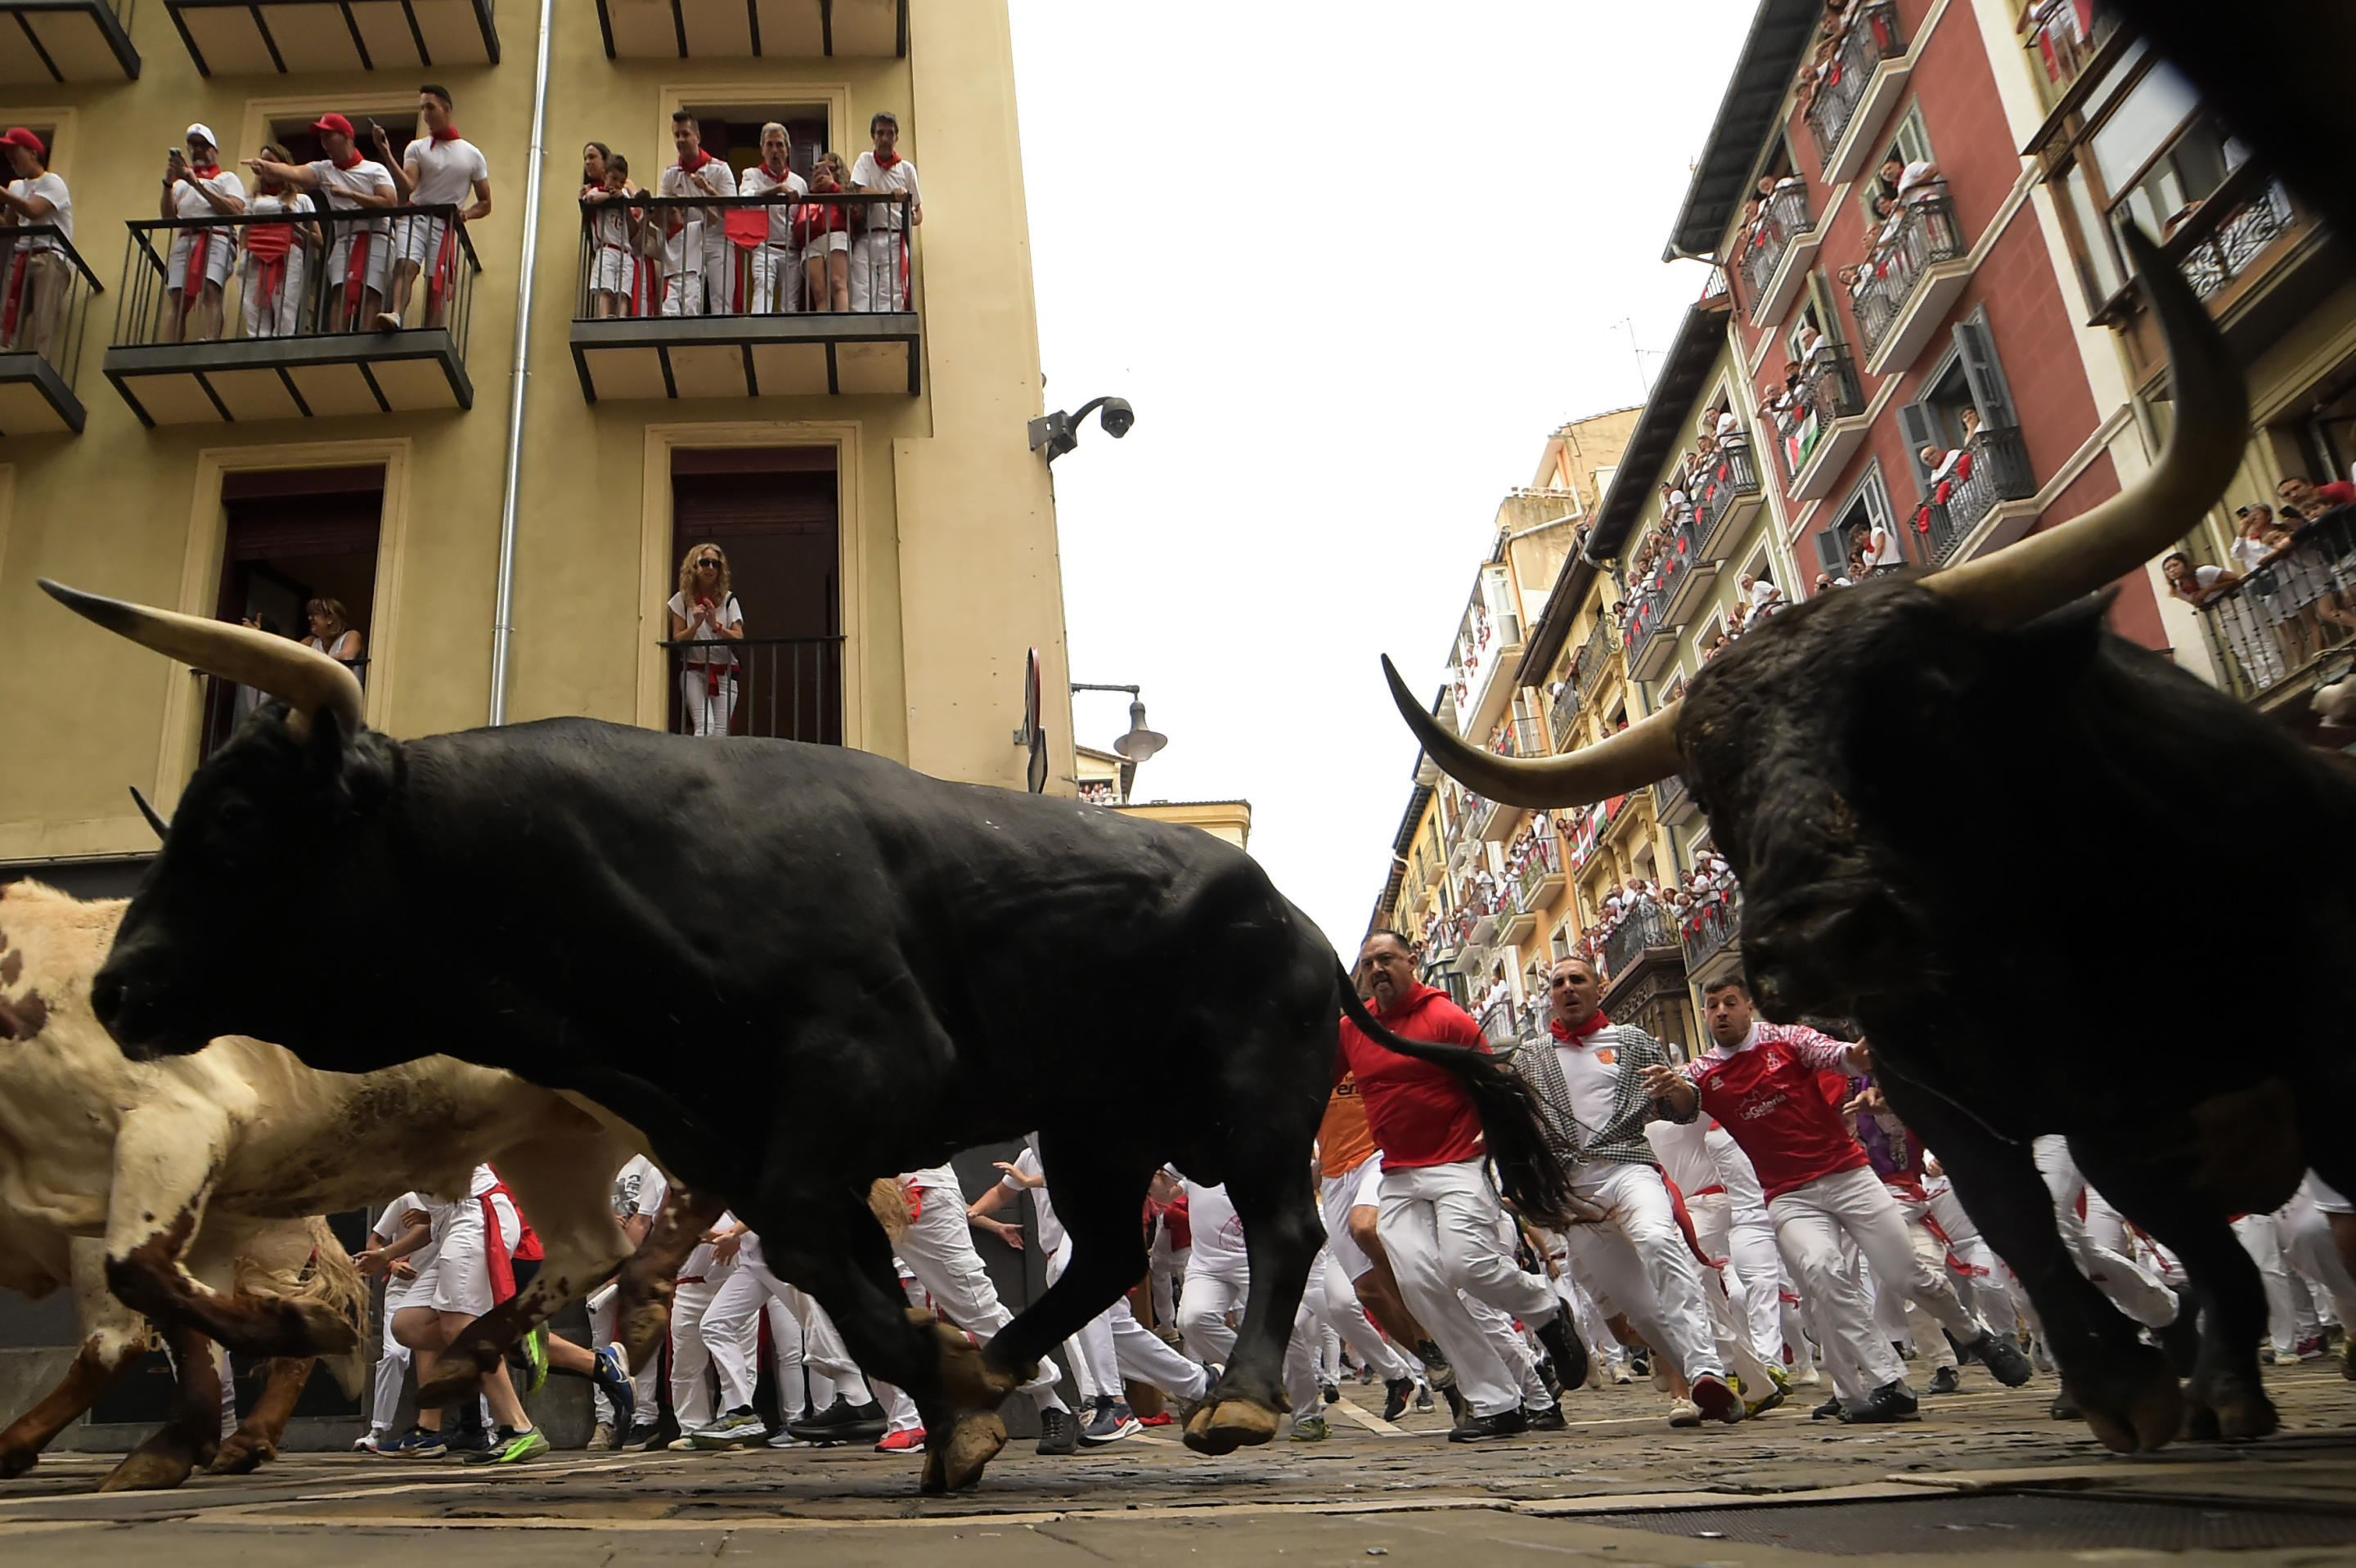 Bulls and festivalgoers can be seen turning a corner on a narrow street during the Pamplona bull run as spectators watch from the balconies above.